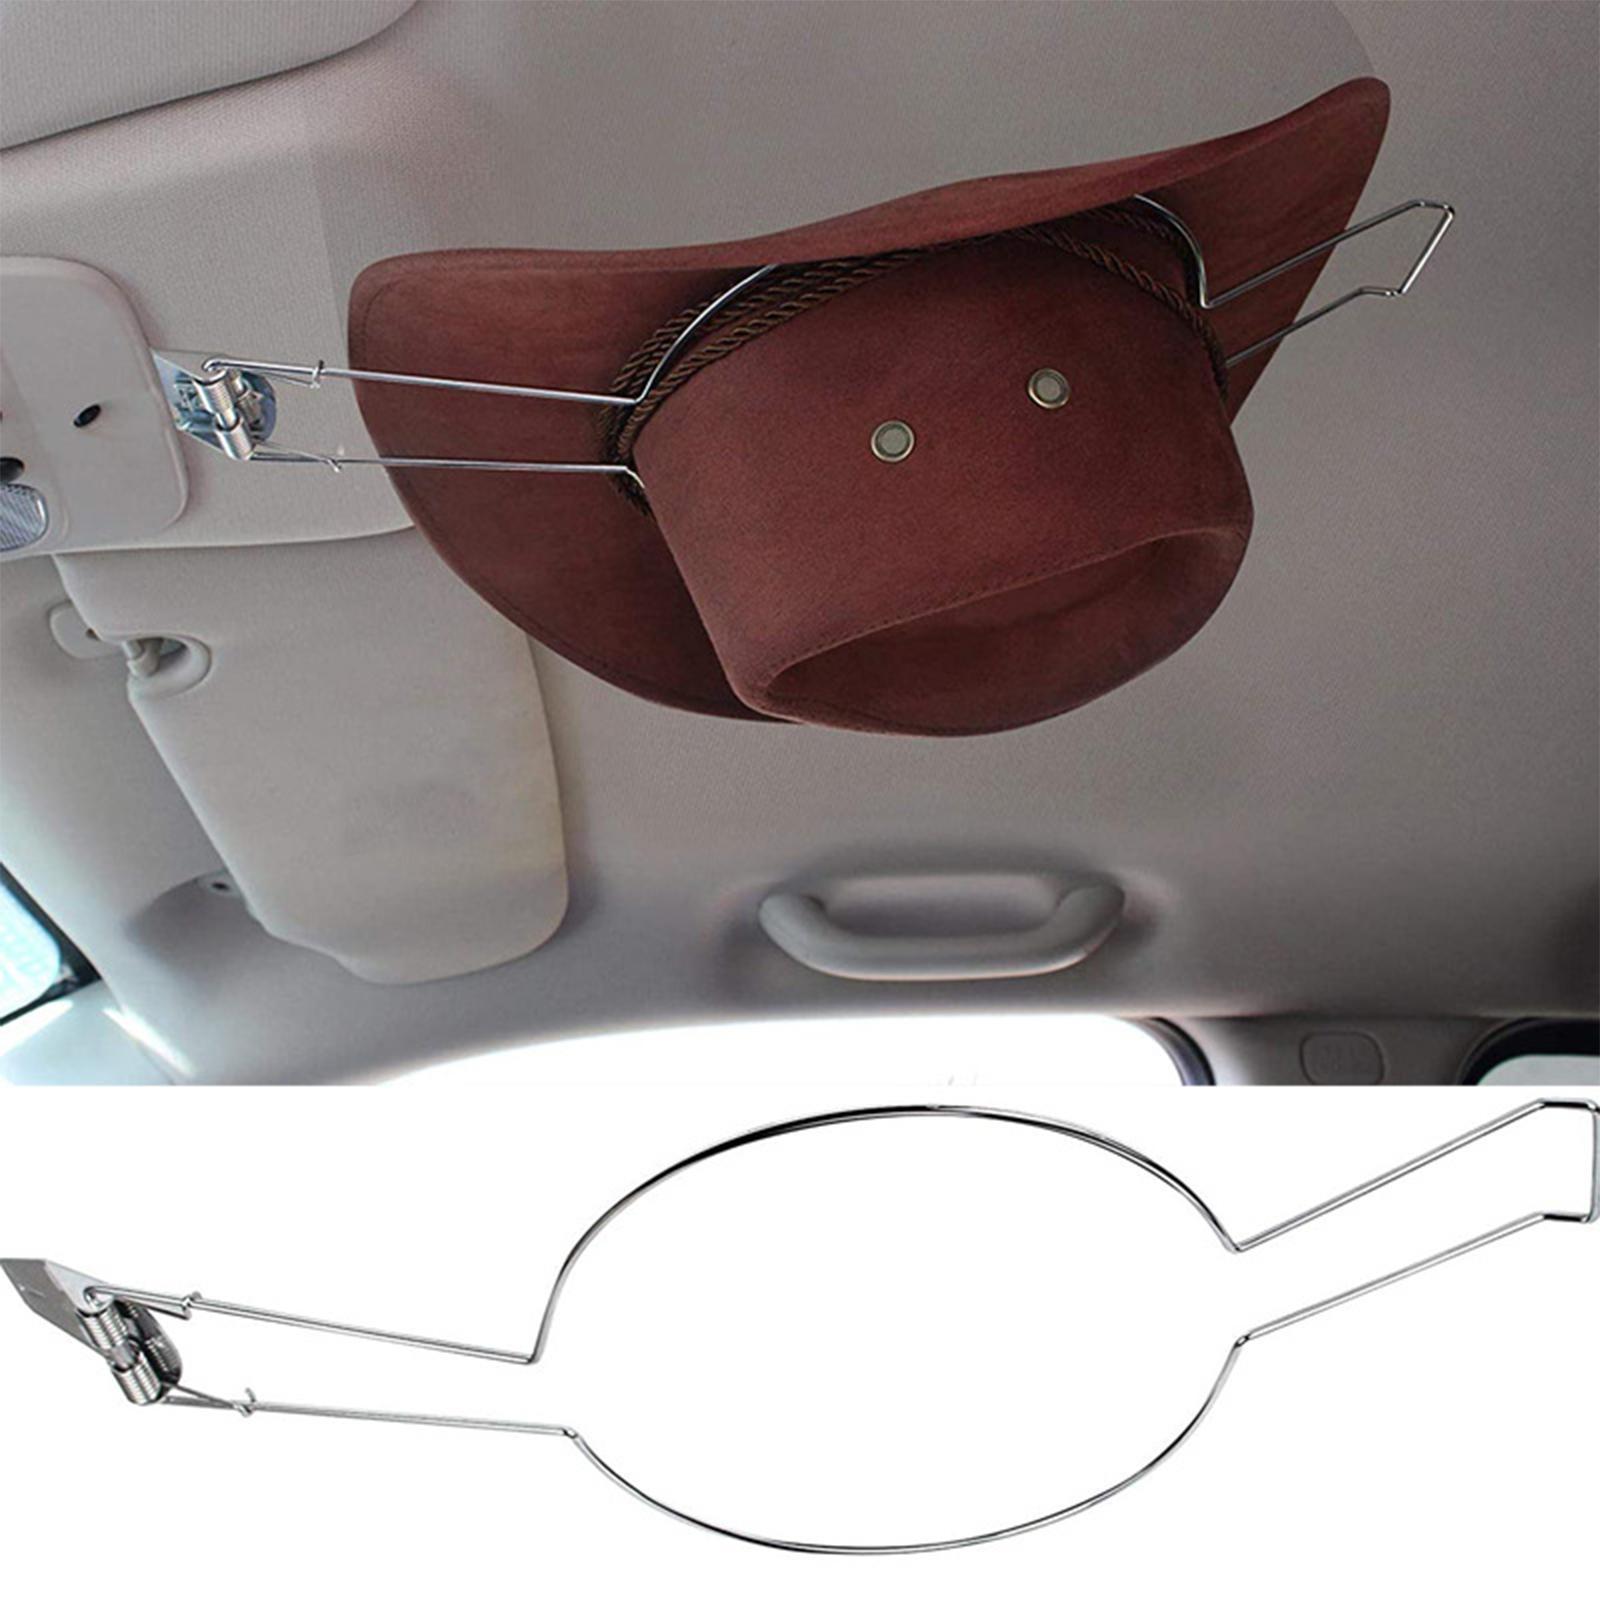 Car Mounted Cowboy Hat Holder Rack Organizer Hat Clip Heavy Duty Saver Spring Loaded Hanging Rack Hanger  for SUV Truck Auto